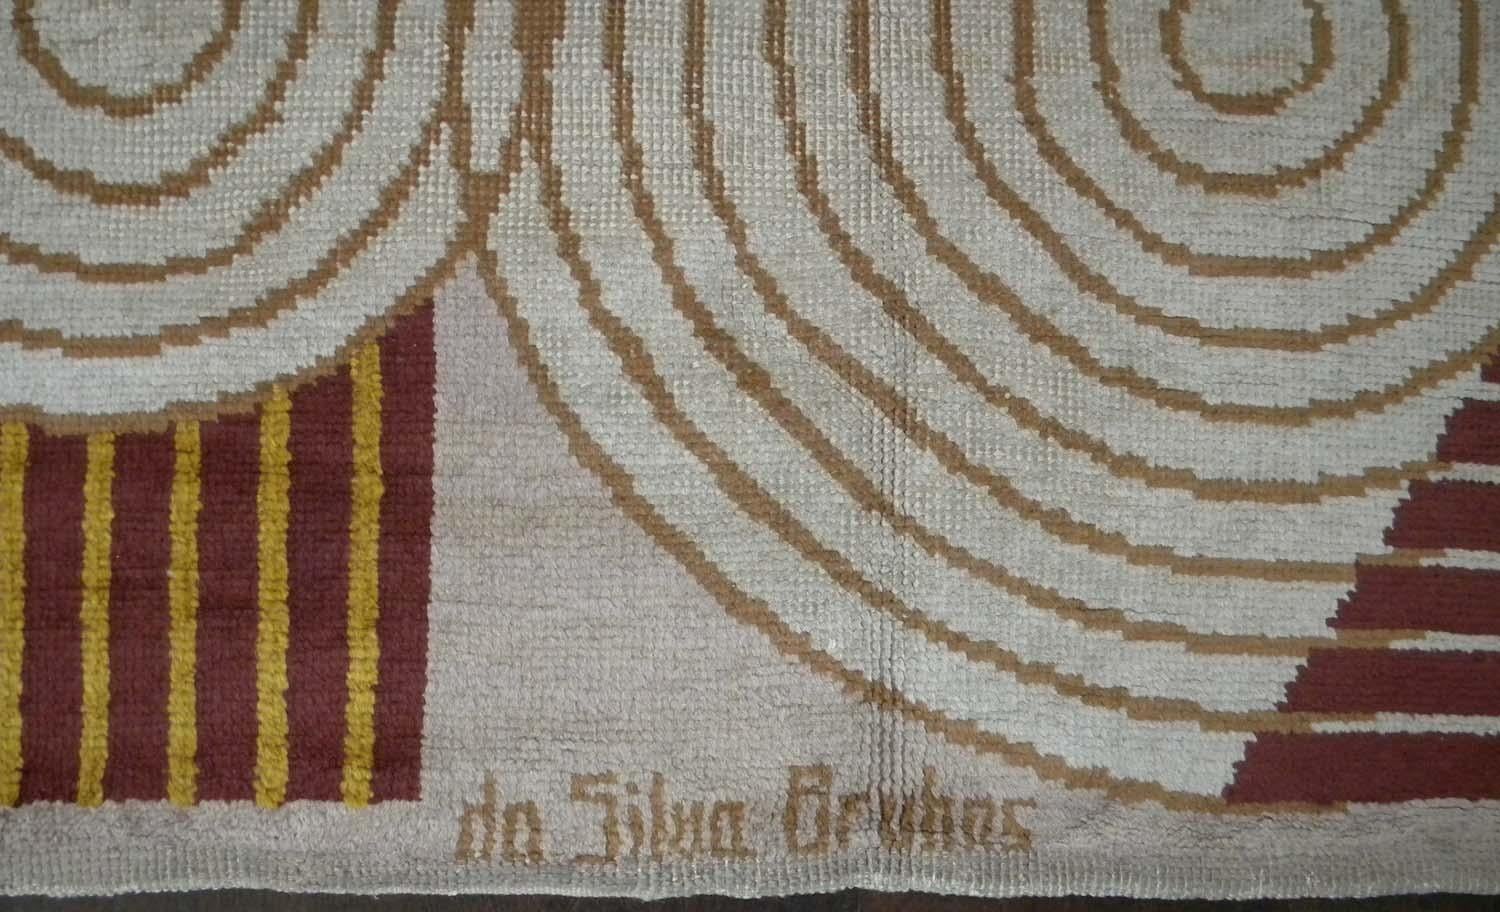 Ivan da Silva Bruhns (1881-1980)
Rectangular rug, circa 1930
In wool, decorated with circles of ivory, beige, beige-pink, yellow and burgundy
Measures: 258 x 145 cm. (101½ x 54¼ in.)
Signed with the monogram of the Savigny factory.

 